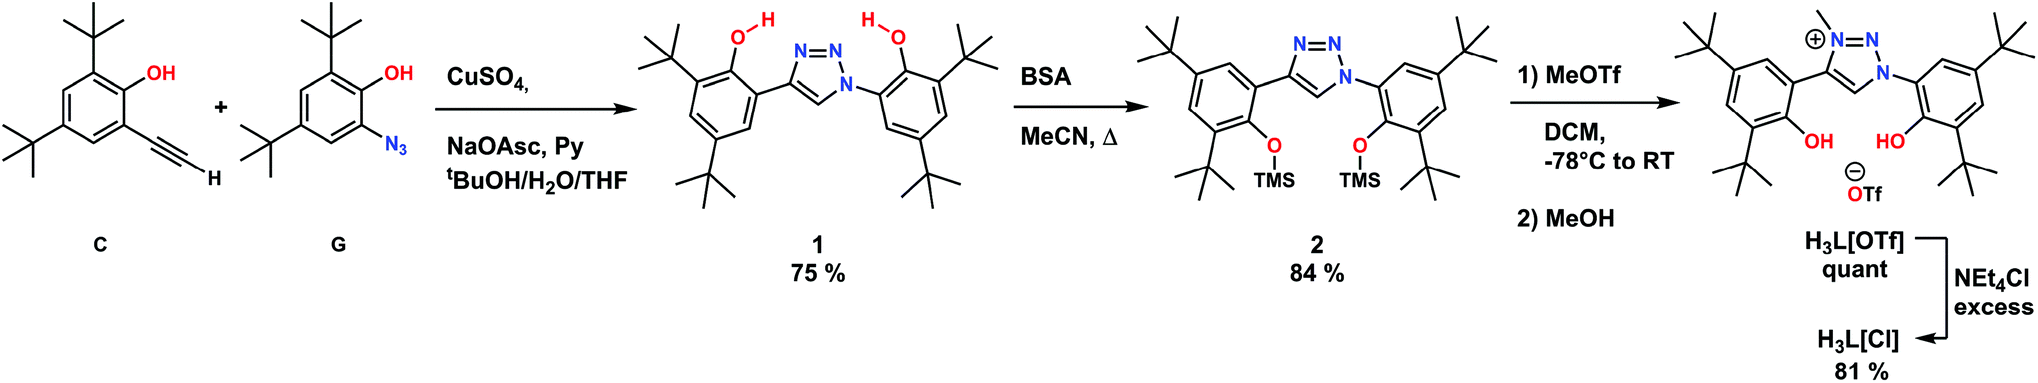 A New Bis Phenolate Mesoionic Carbene Ligand For Early Transition Metal Chemistry Dalton Transactions Rsc Publishing